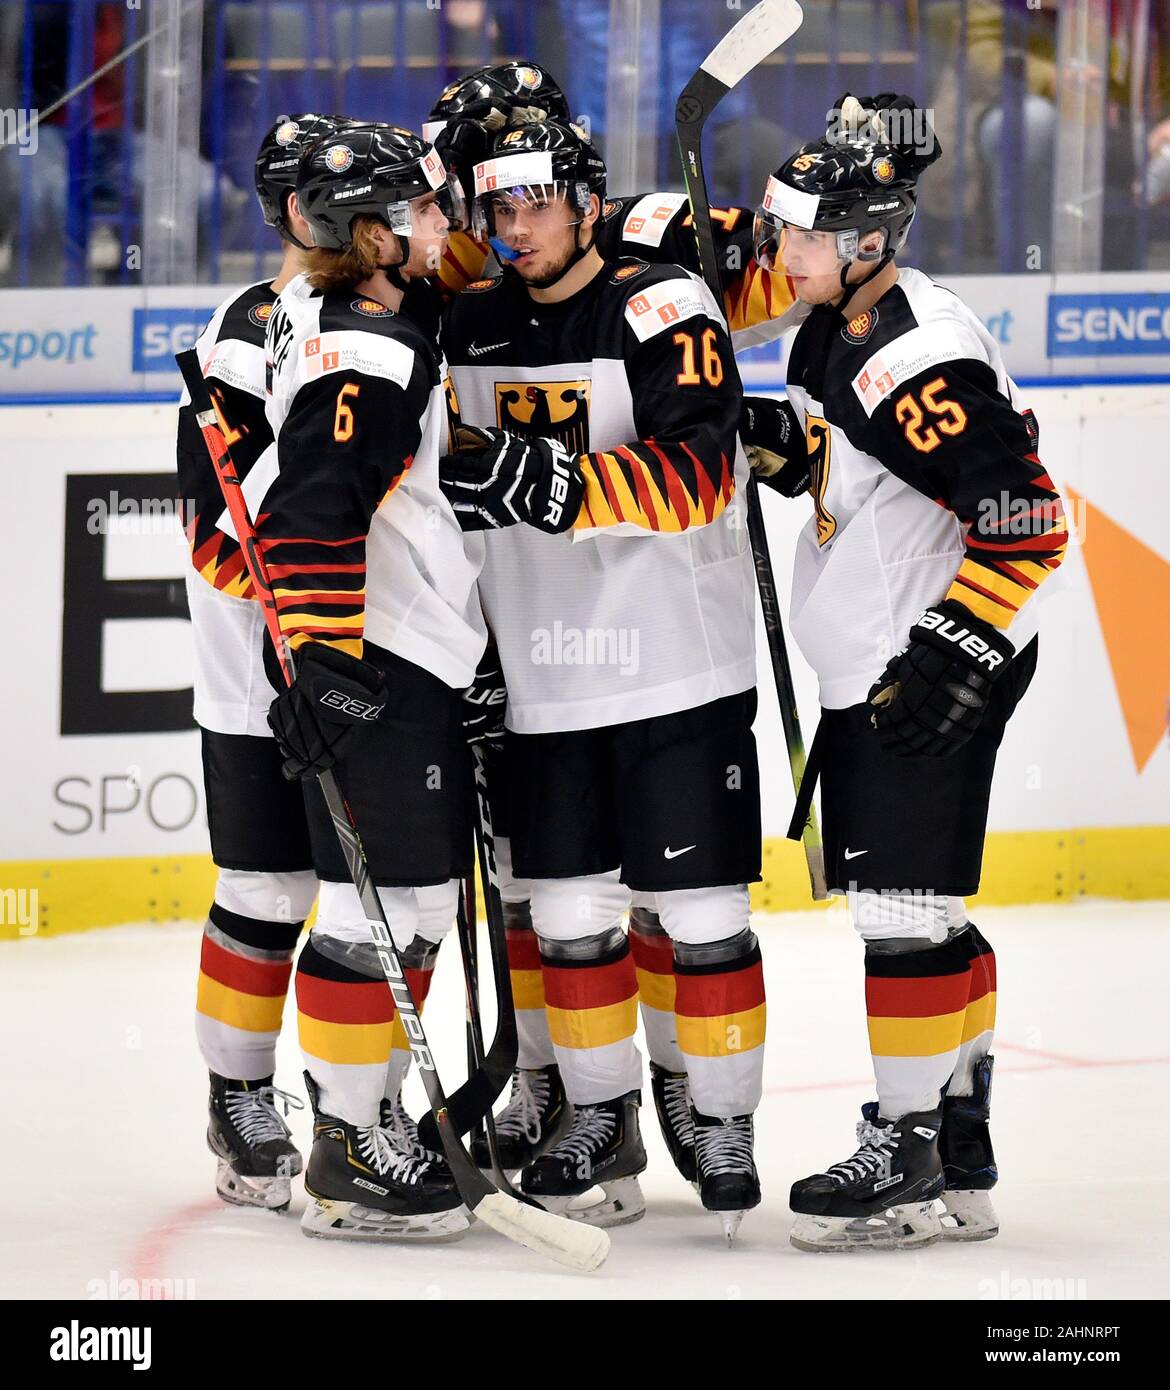 Hockey players of Germany, U20, celebrate a goal during the 2020 IIHF World Junior Ice Hockey Championships Group B match between Russia and Germany in Ostrava, Czech Republic, on December 31, 2019